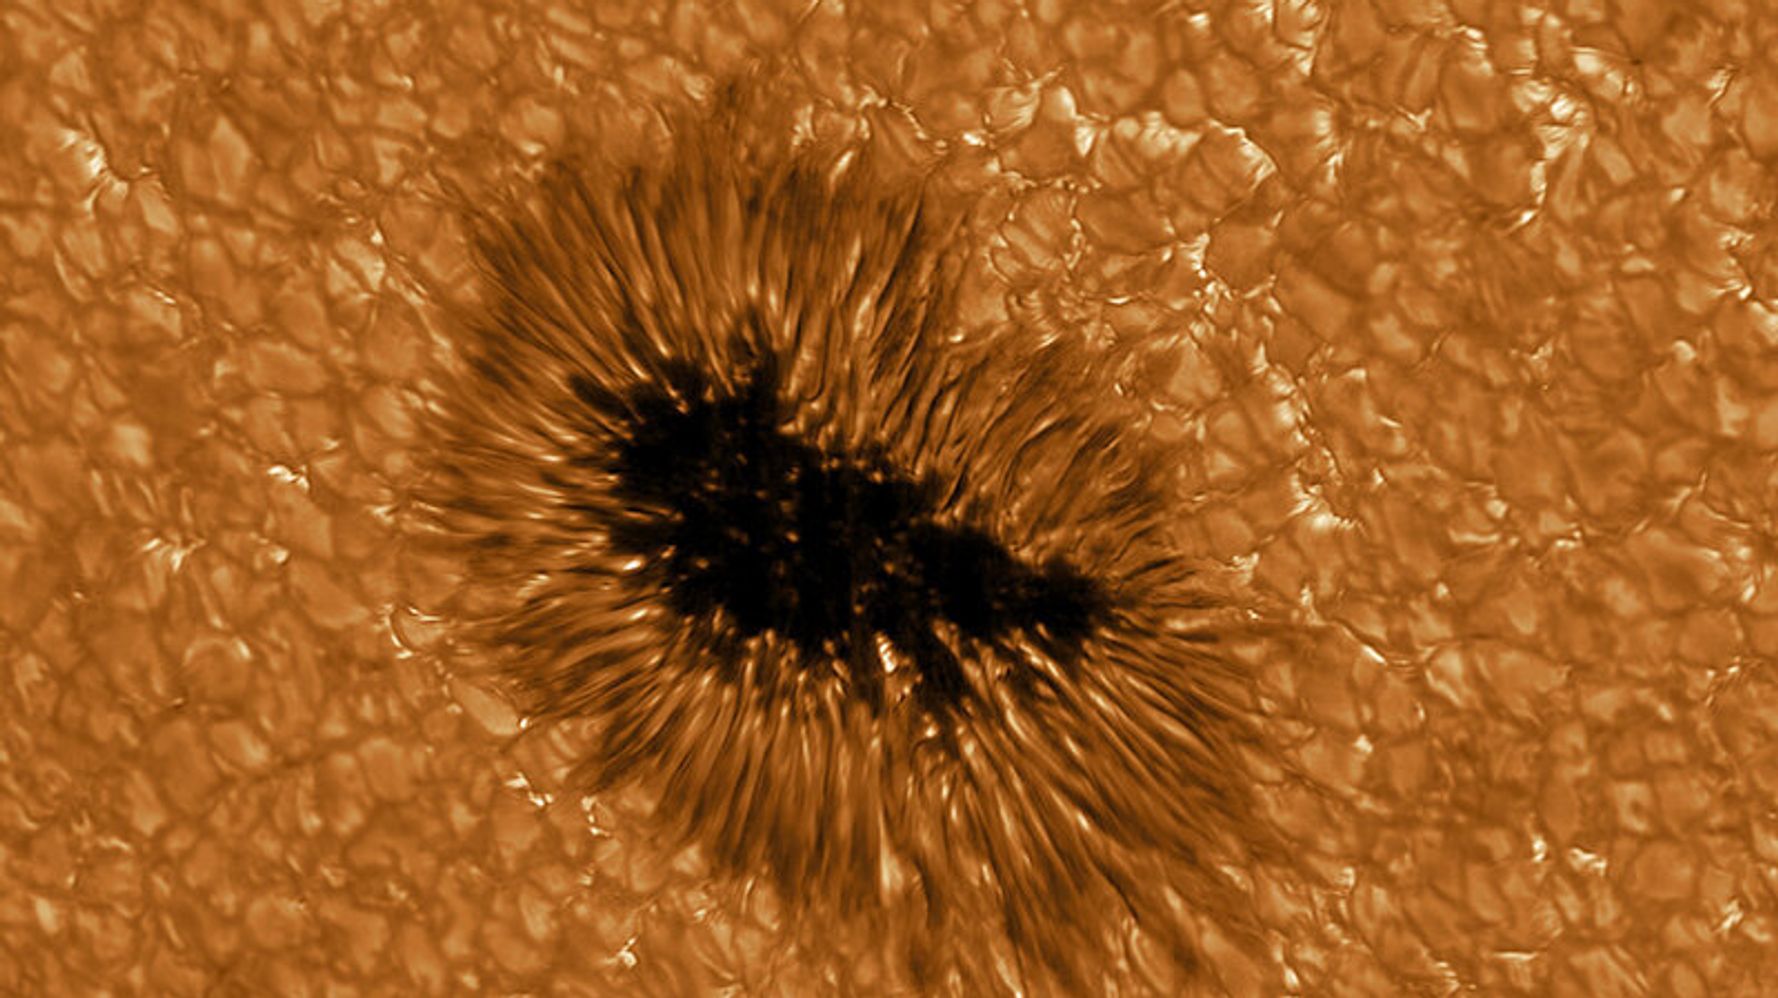 Credit for these solar telescope images, look into a sunlight